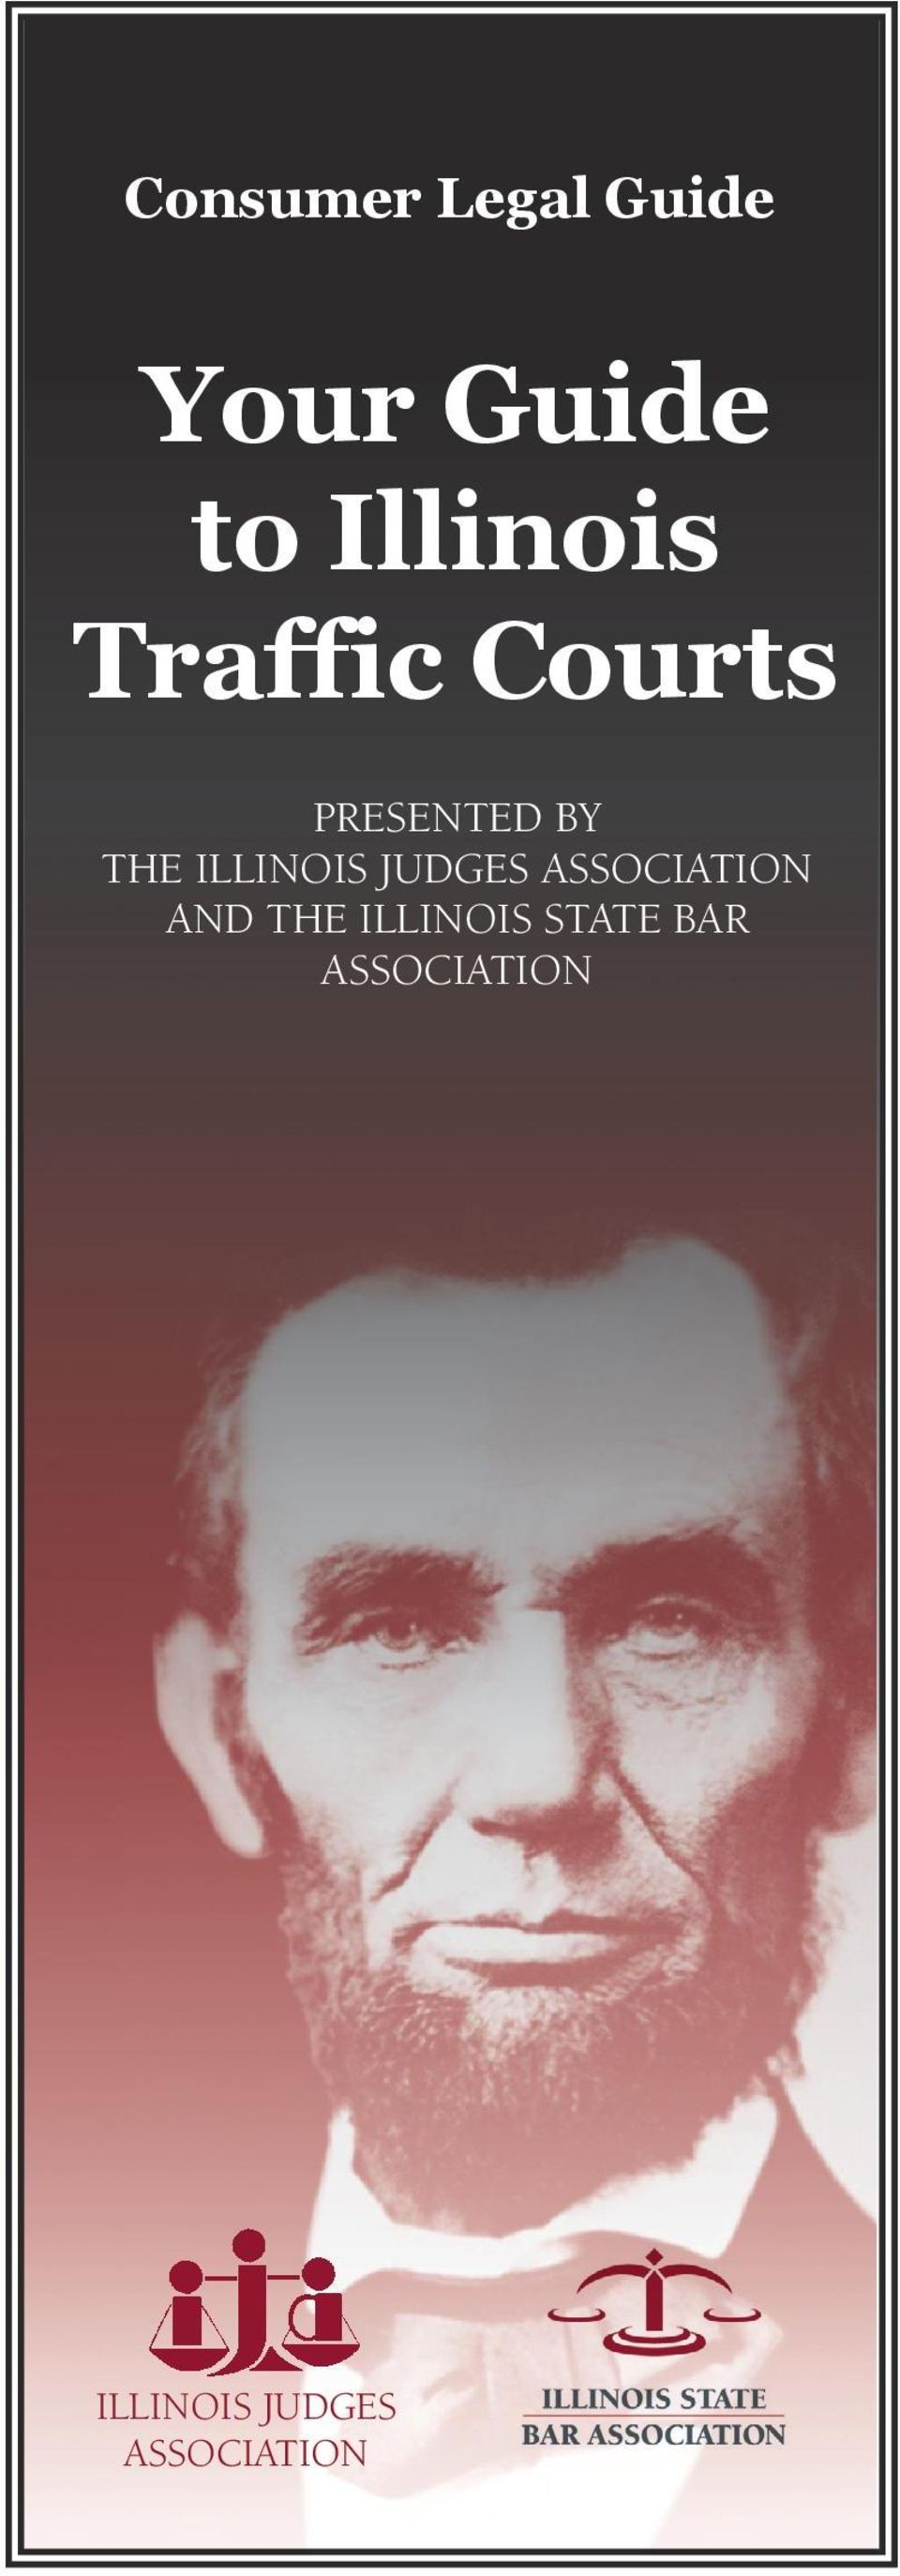 Illinois Judges Association and the